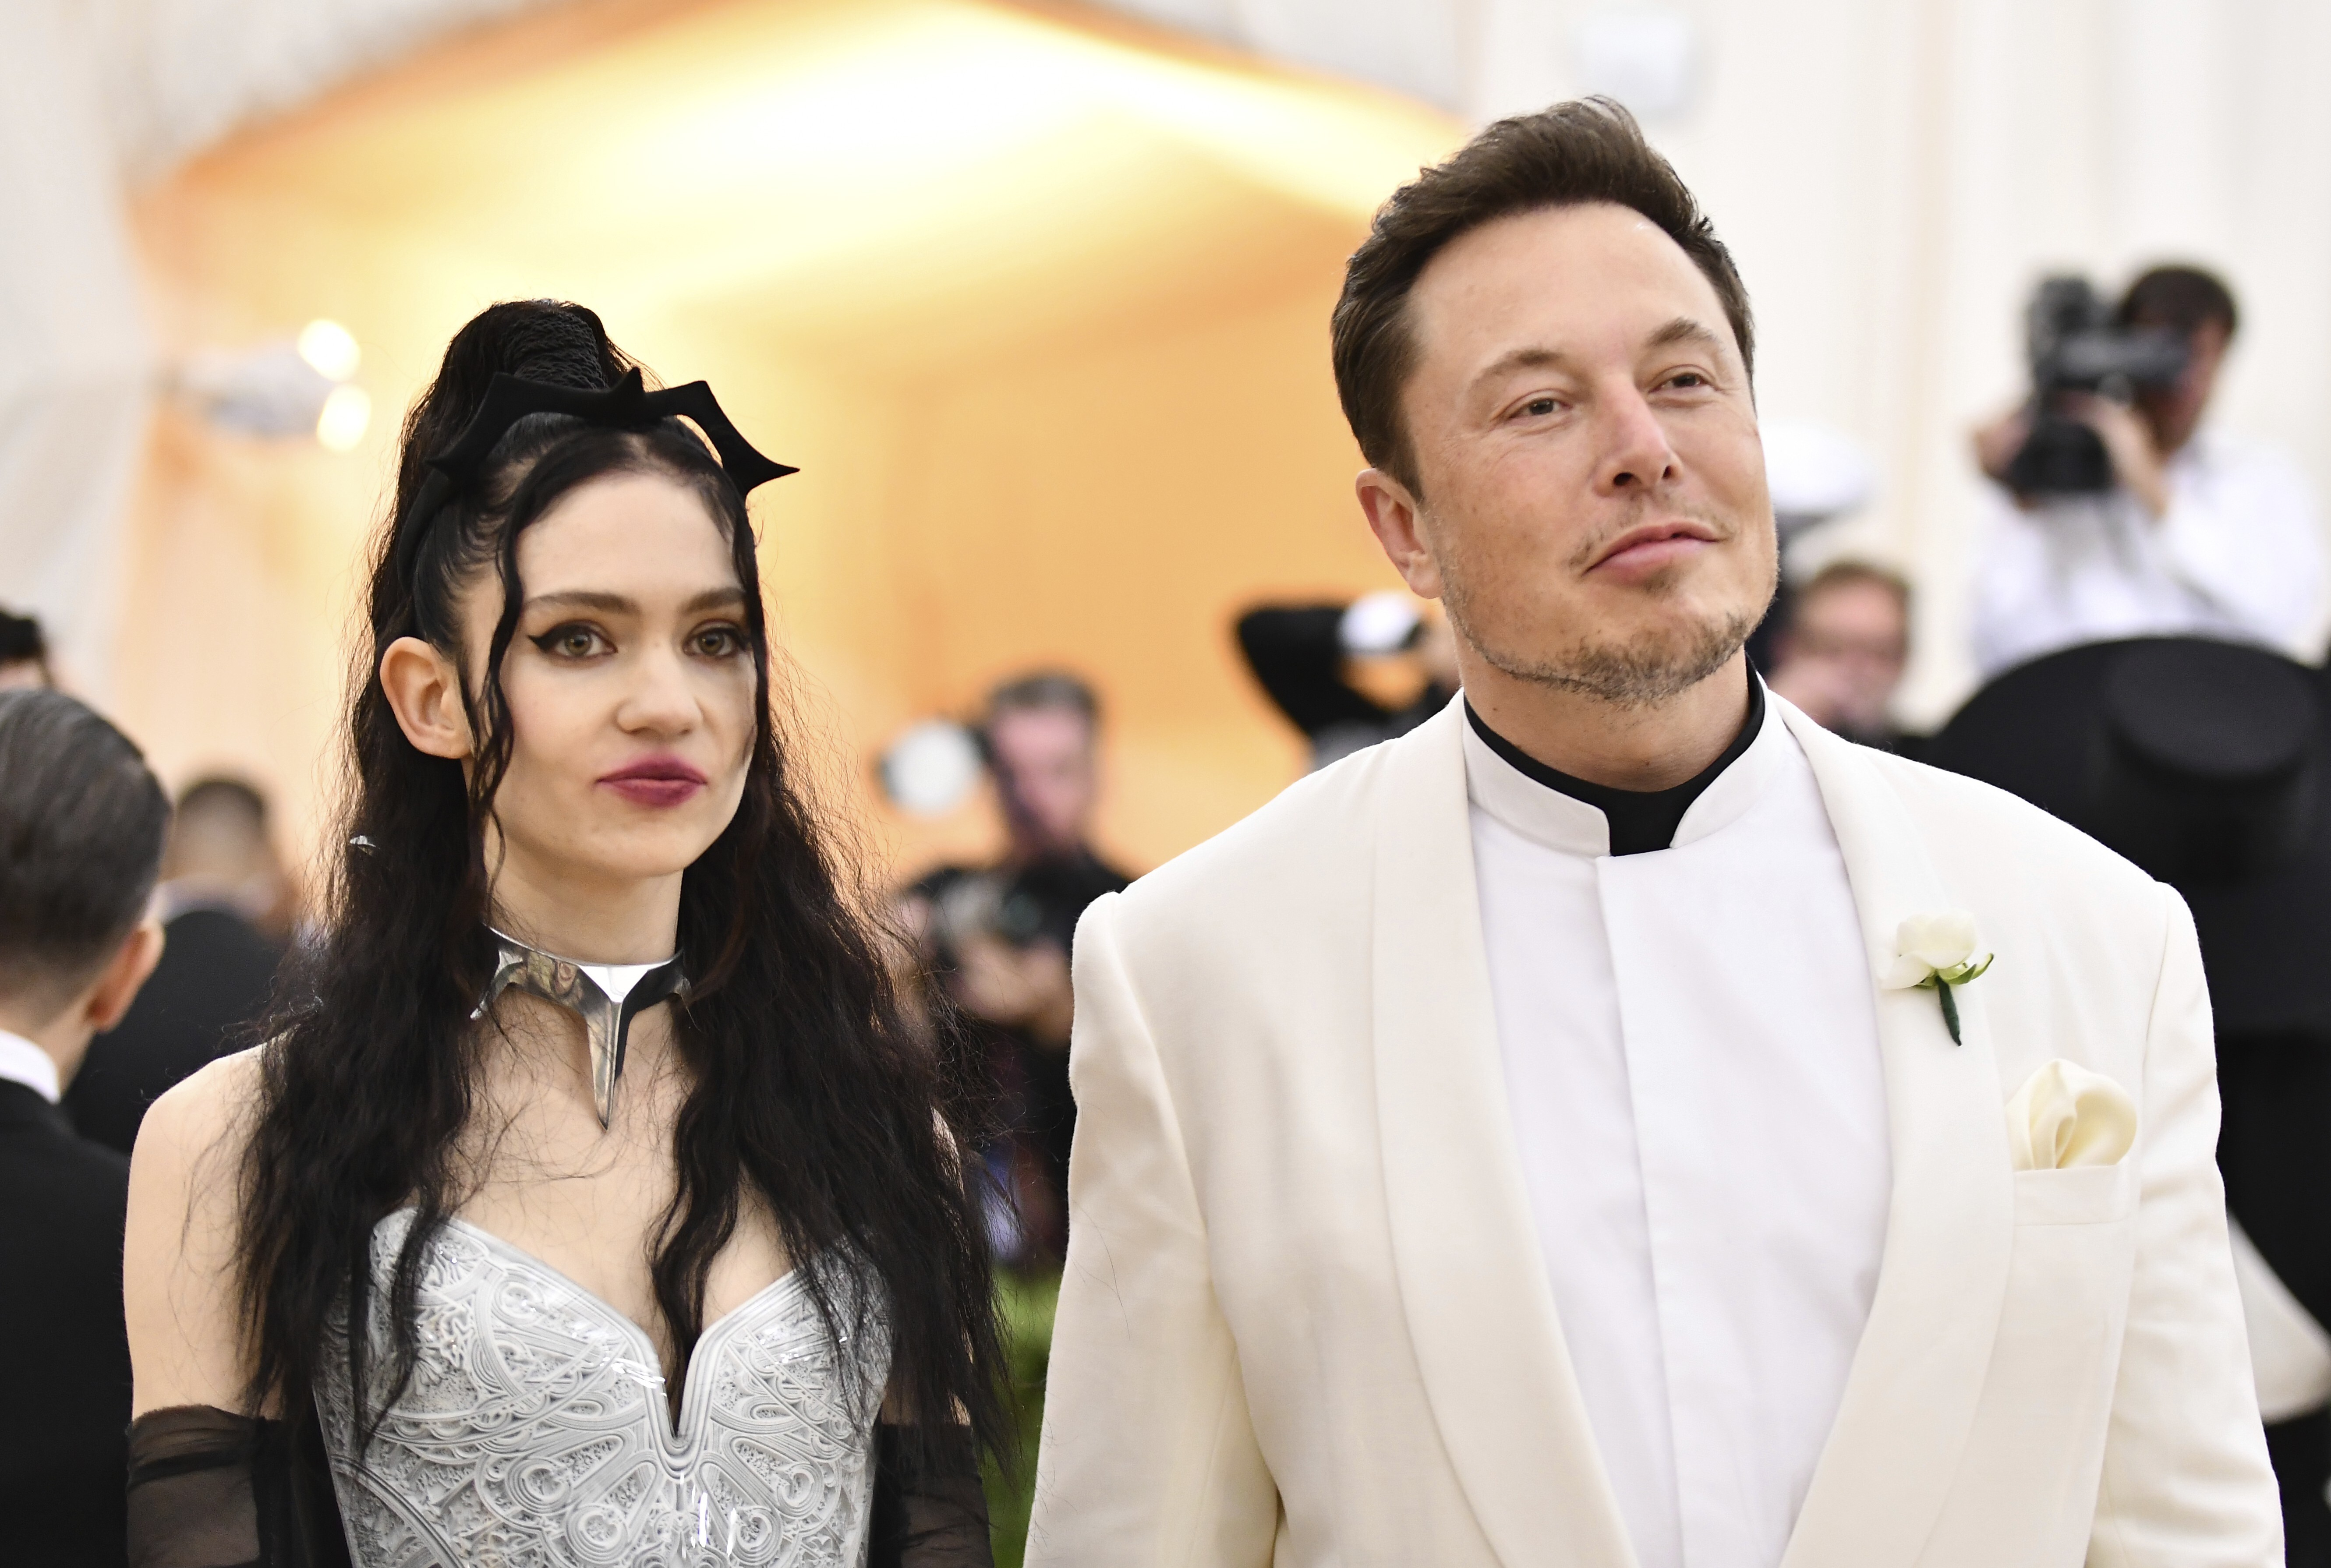 Unpacking that Kanye West and Elon Musk bromance pic – a lot of